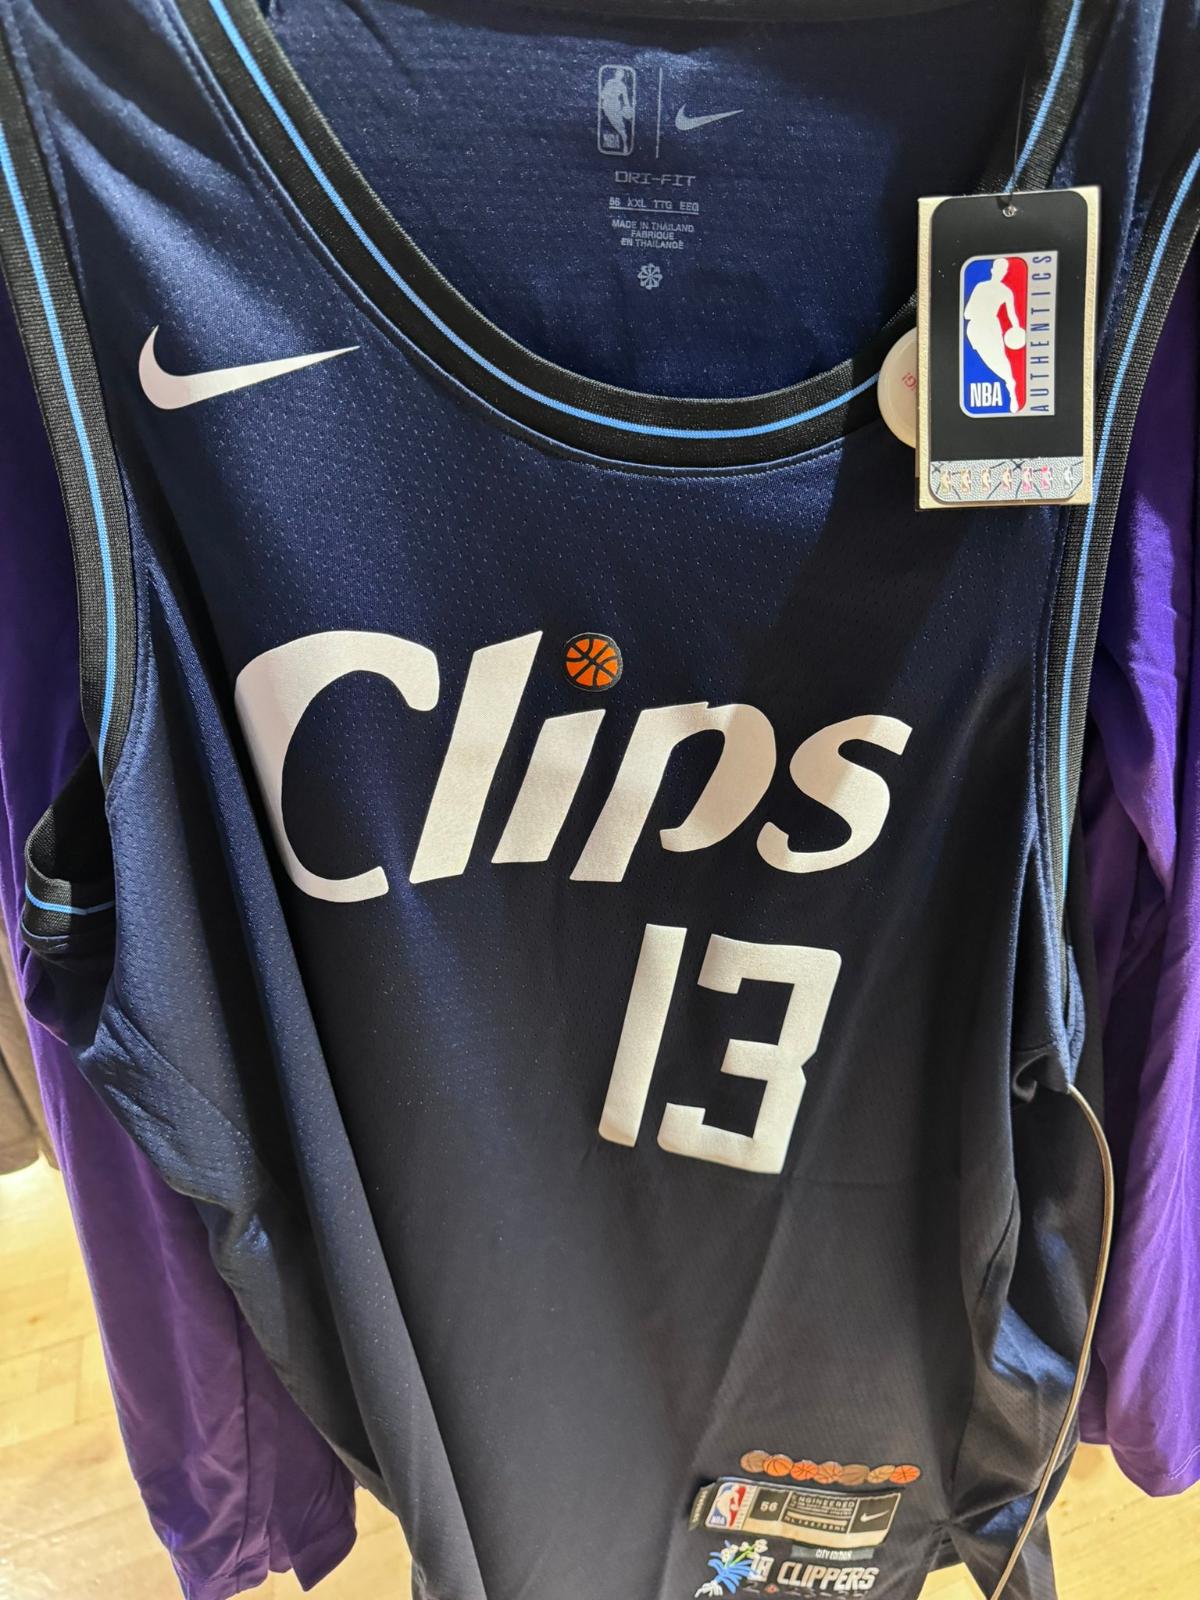 Clippers' City Edition Jerseys Will Differ From Leaks